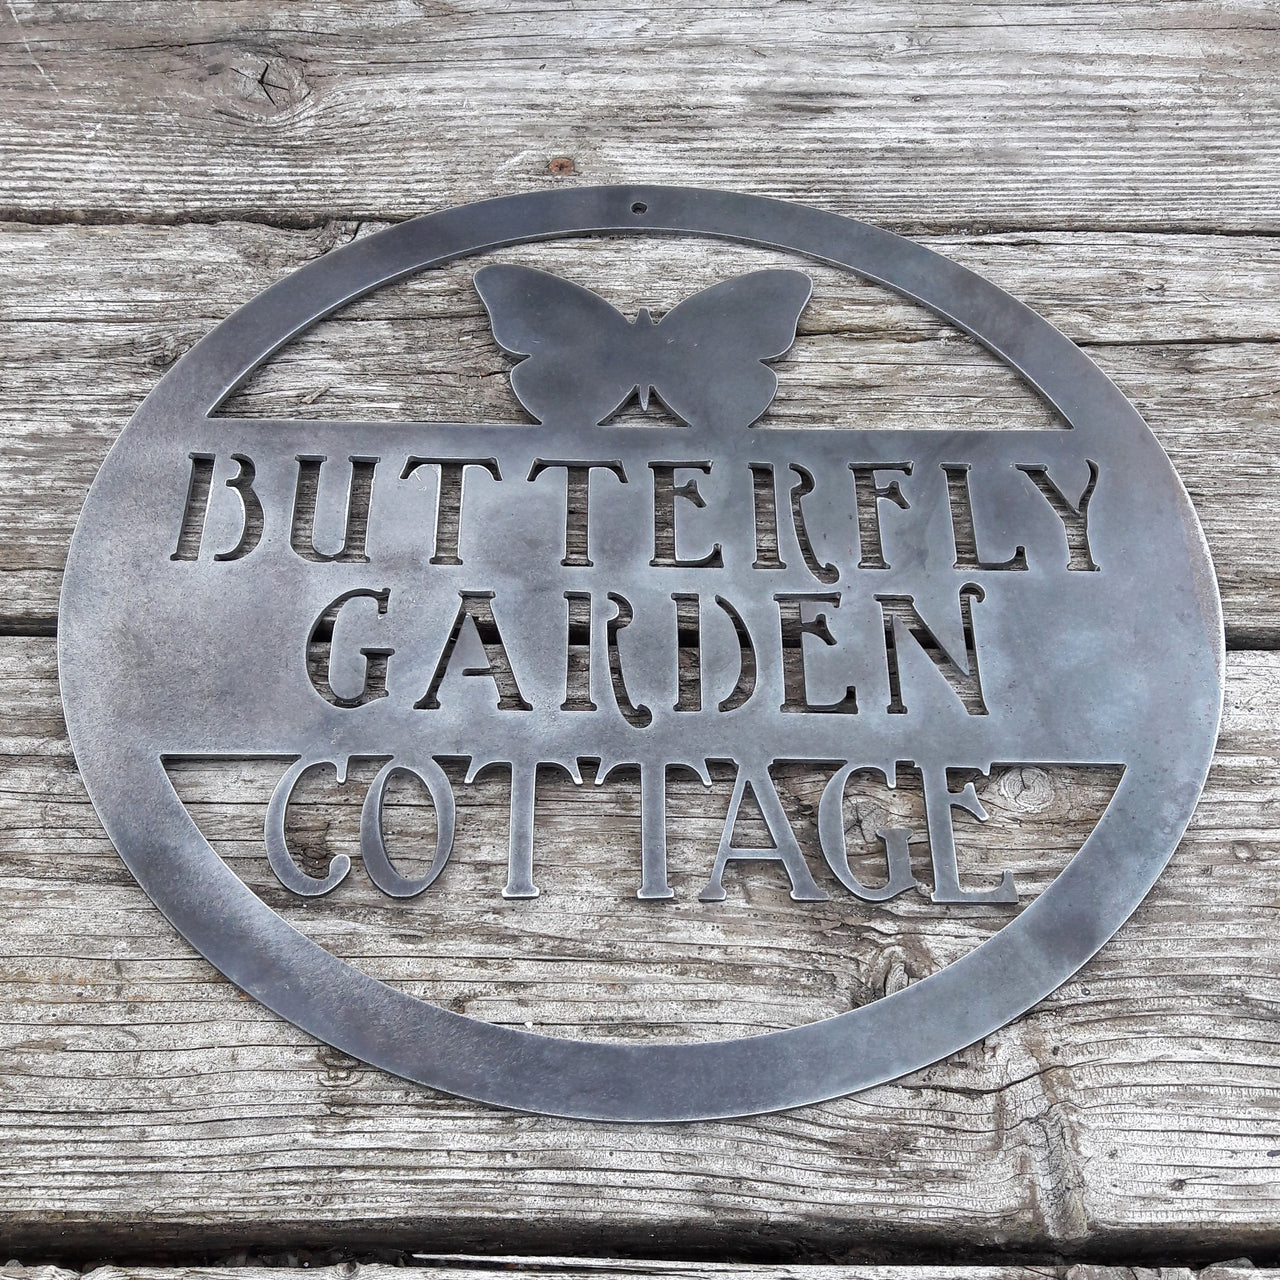 Round metal sign with the image of a Butterfly at the top and three lines of text. The sign reads, " Butterfly Garden Cottage".